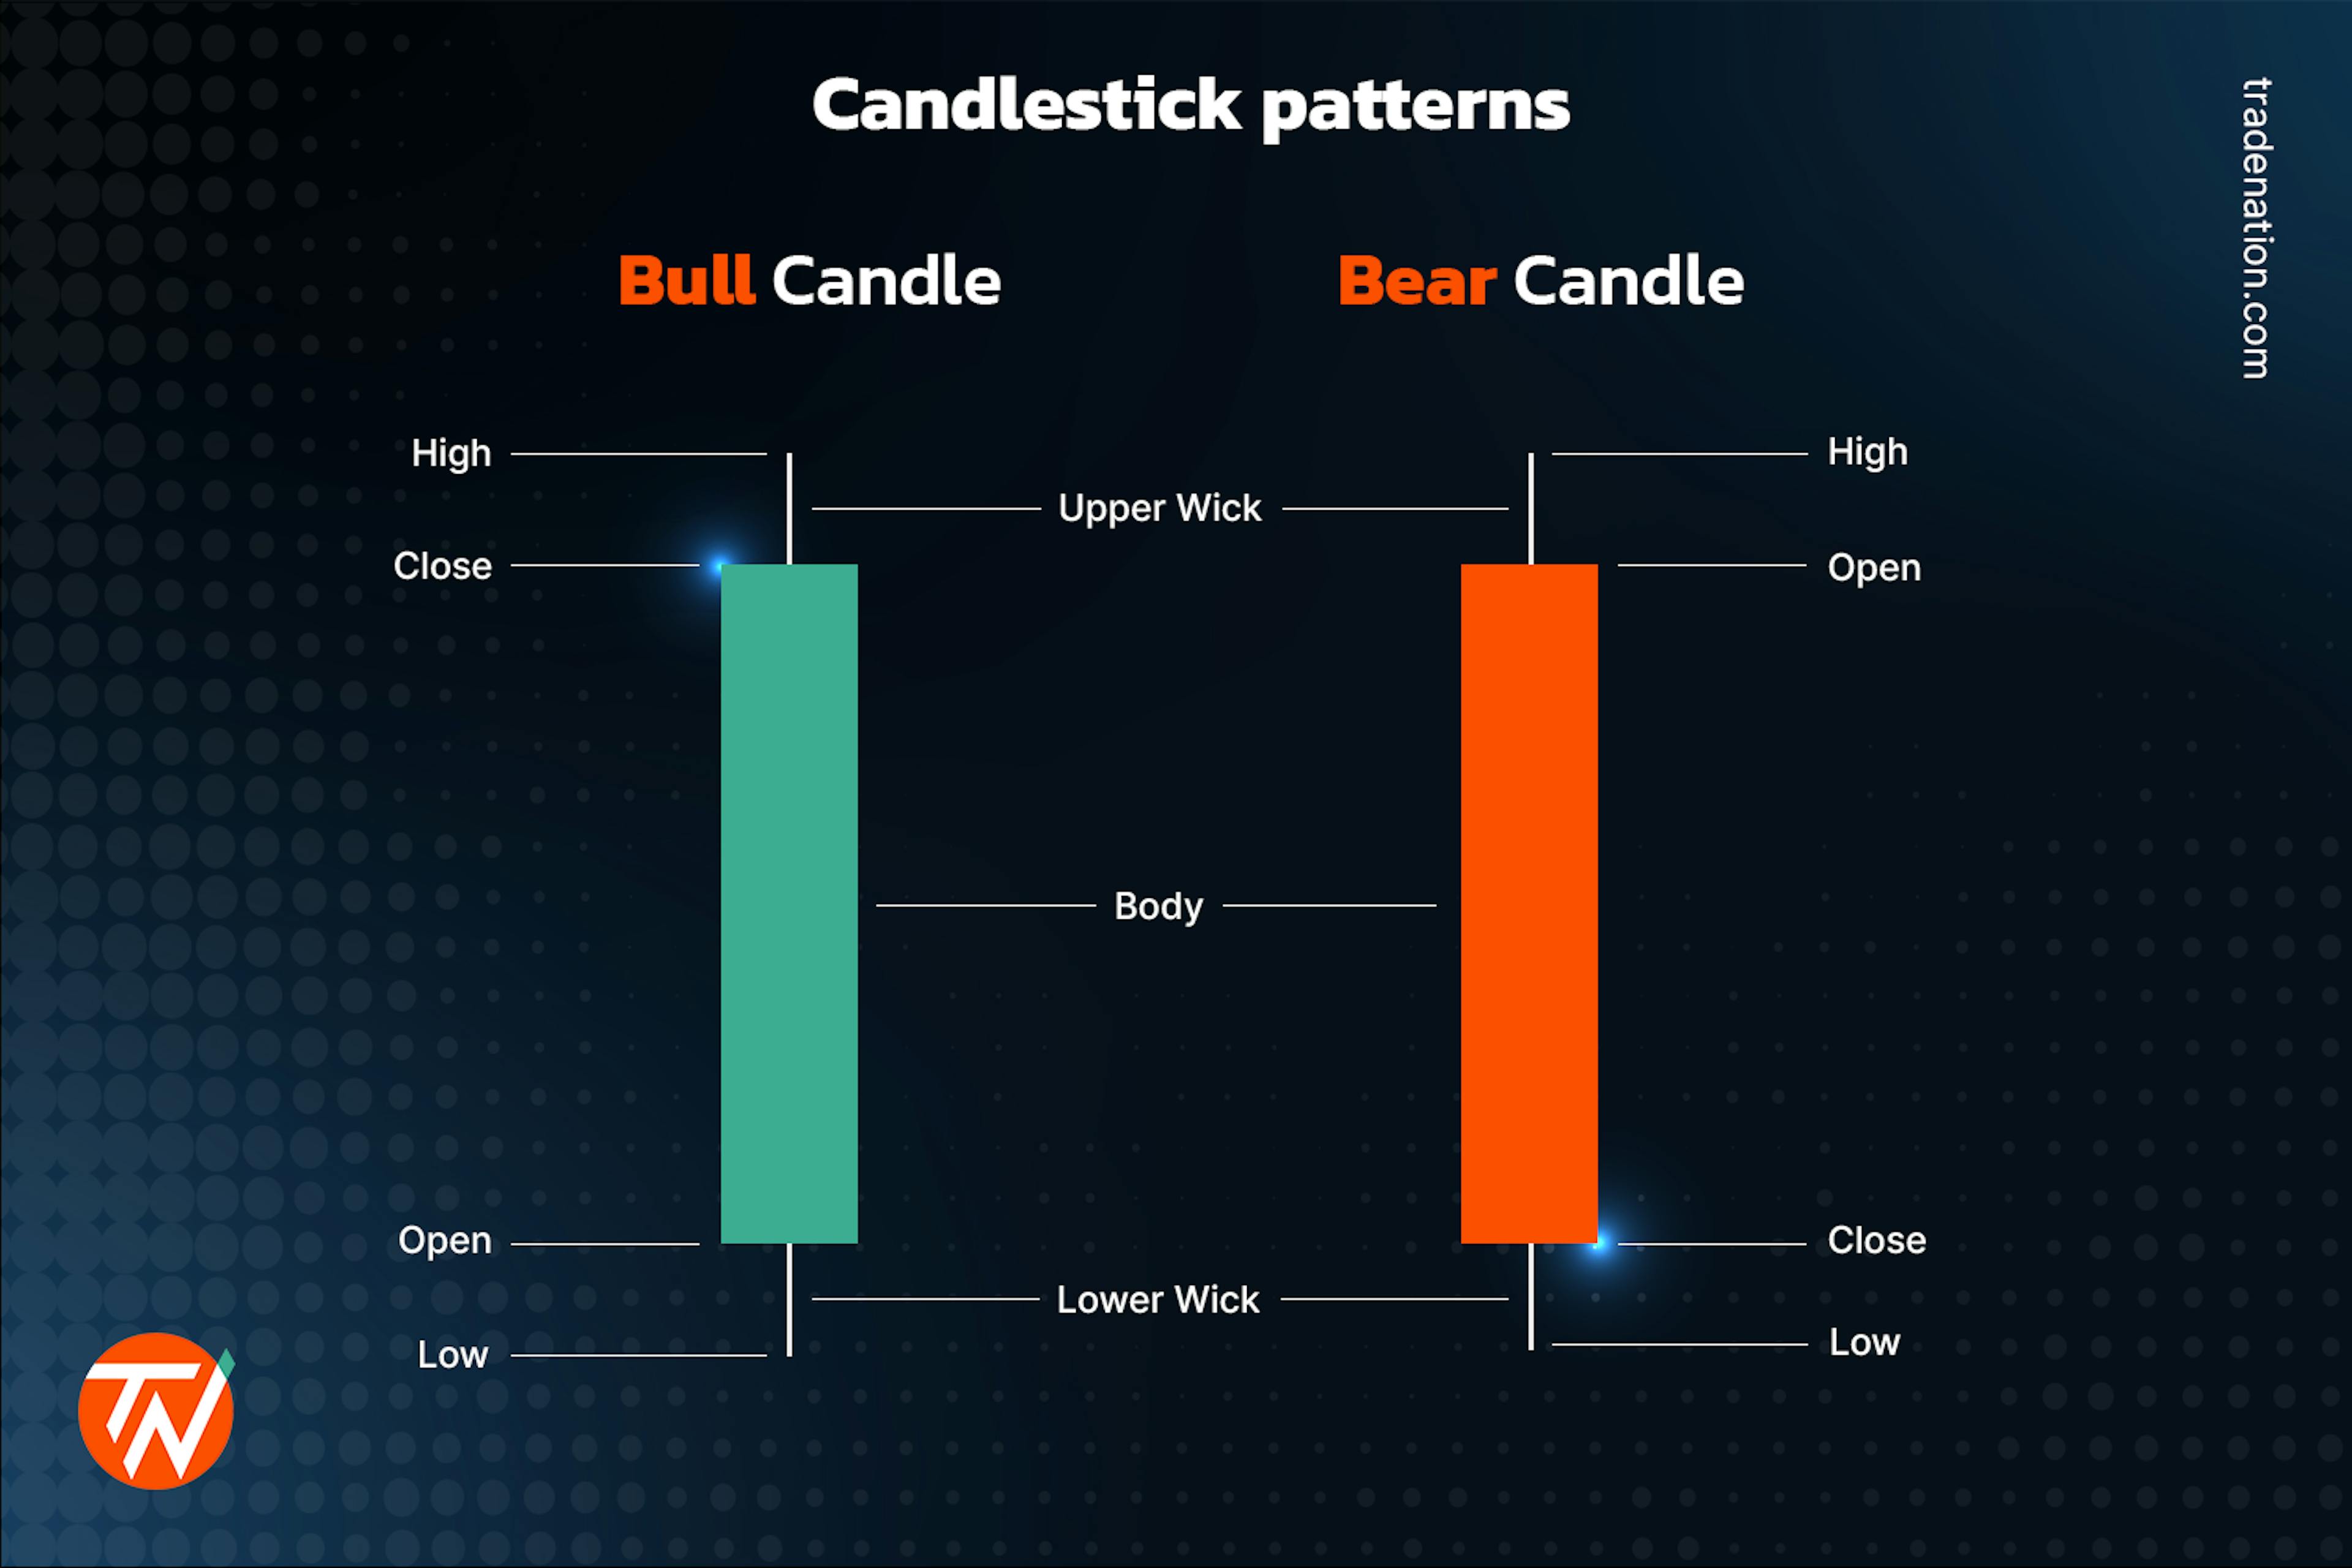 Candlestick patterns demonstrated and explained